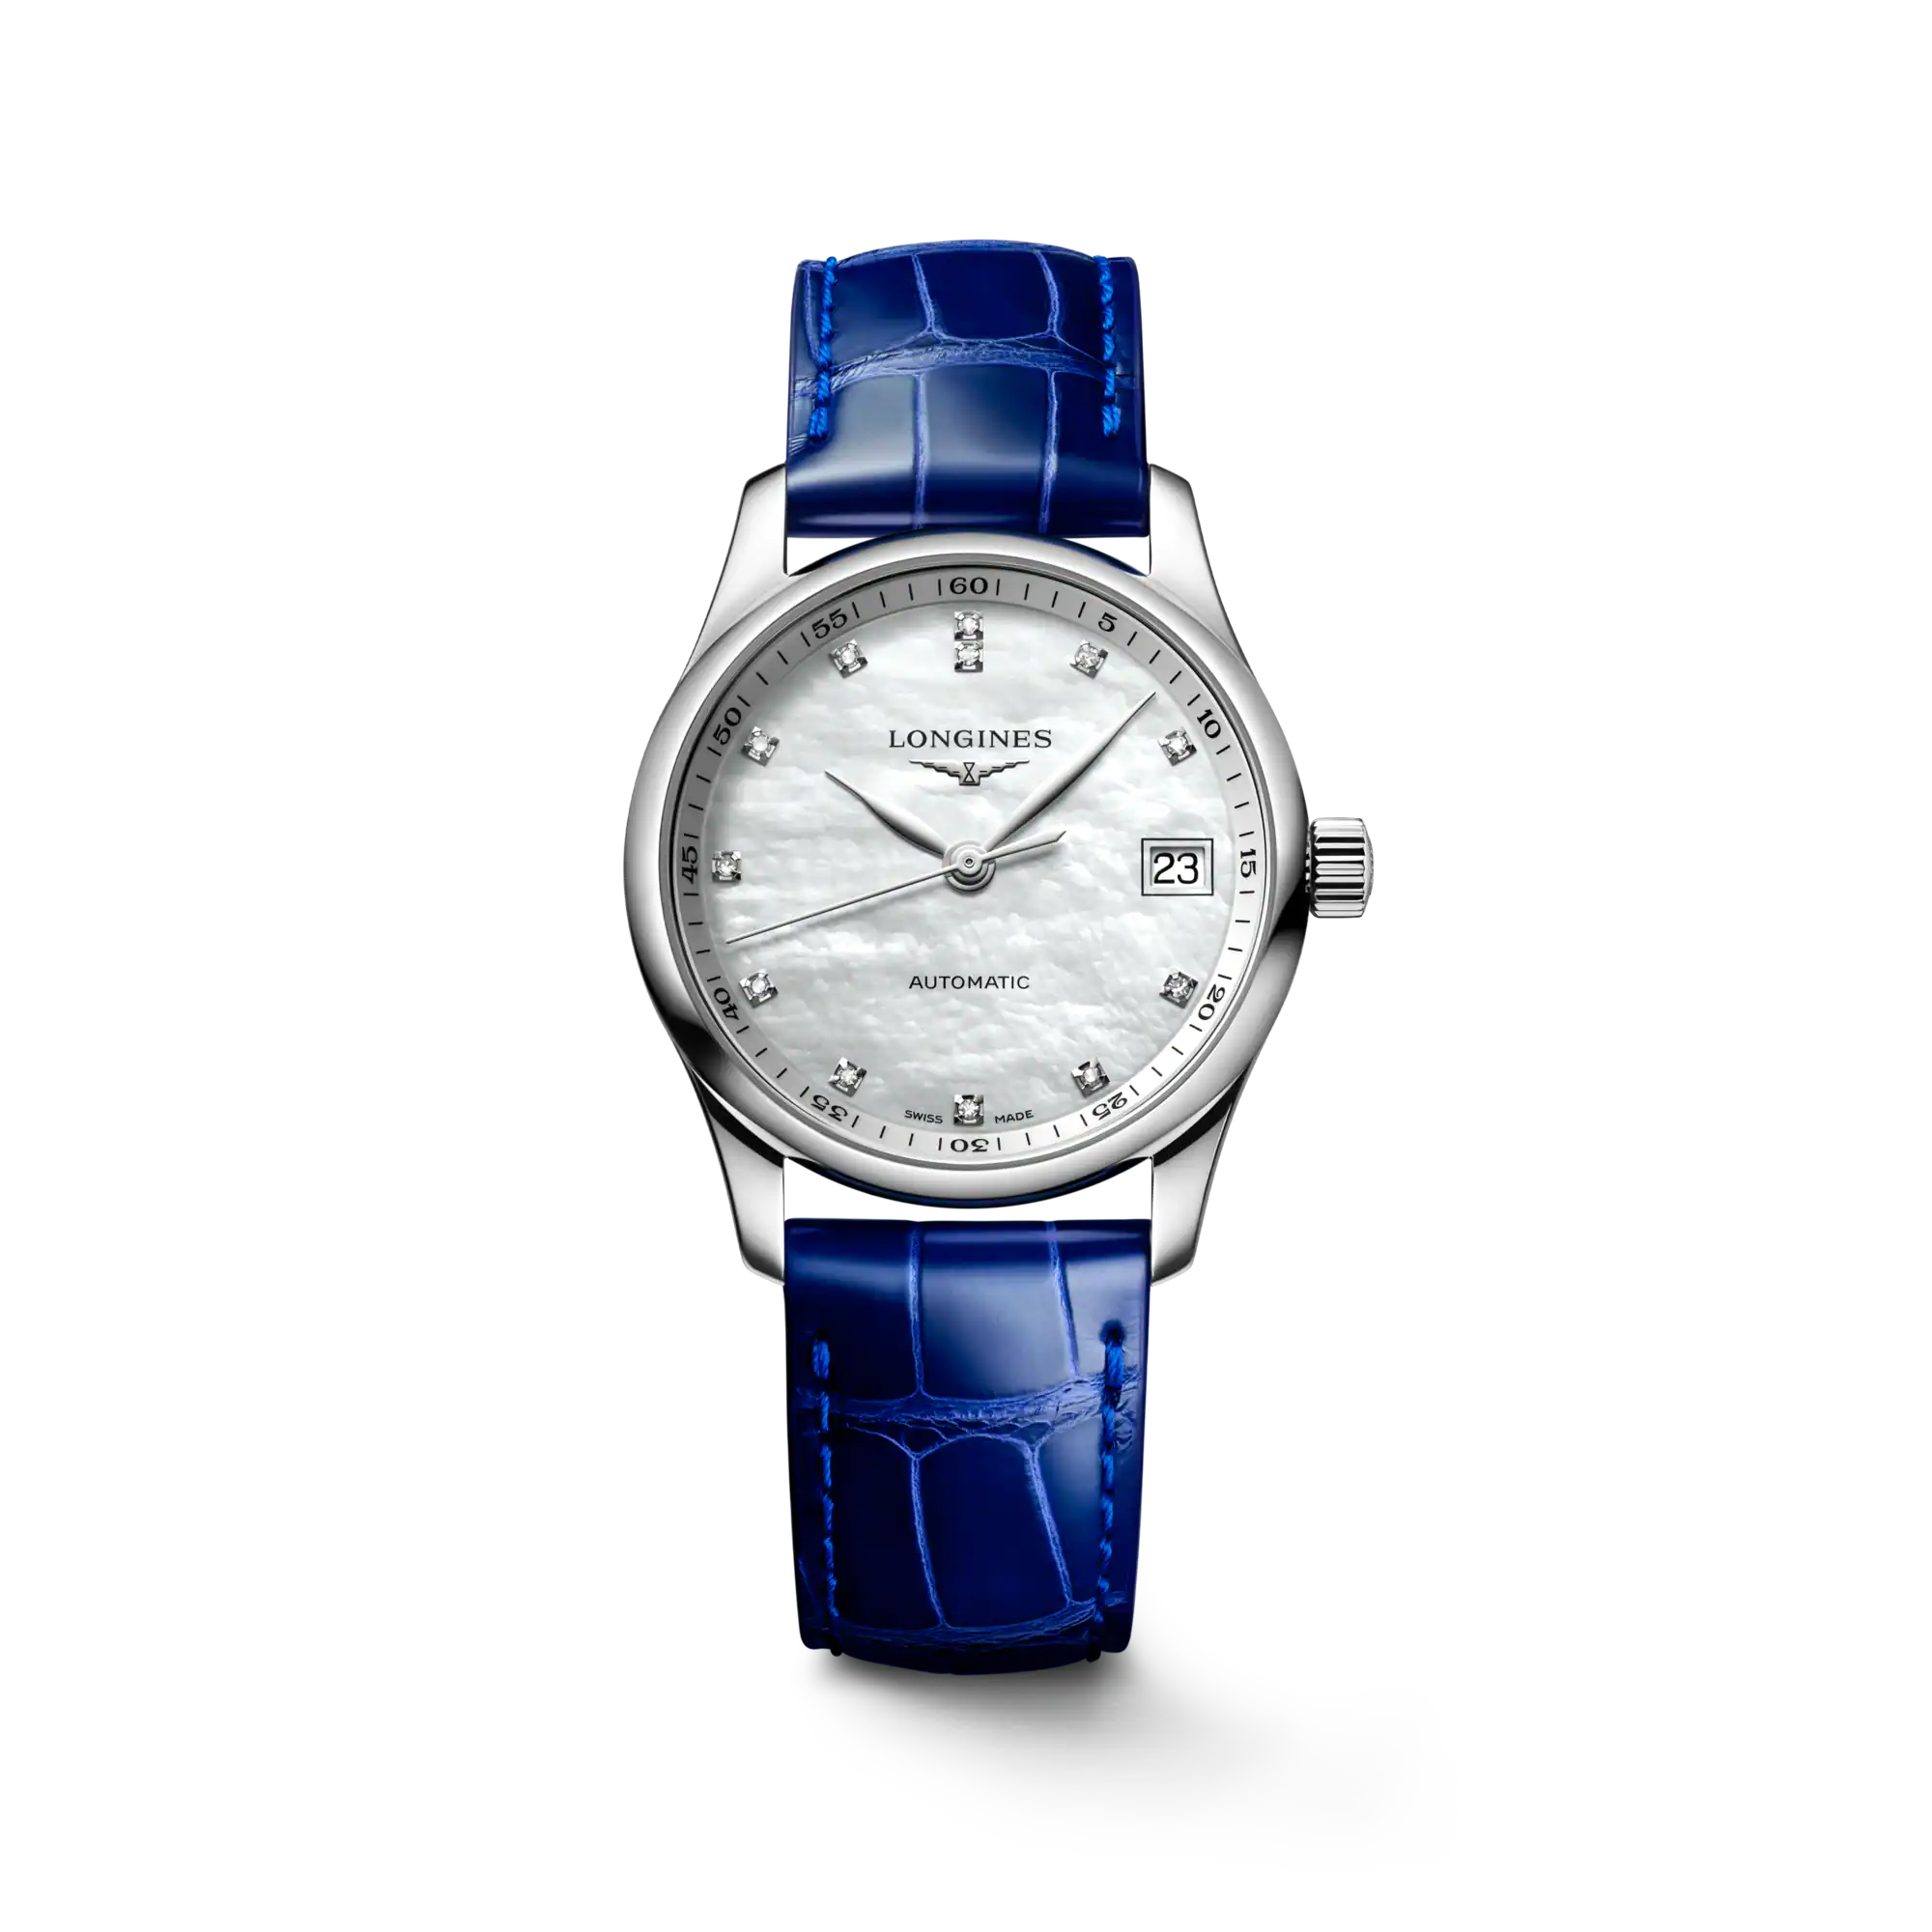 The Longines Master Collection Automatic Women's Watch L23574870